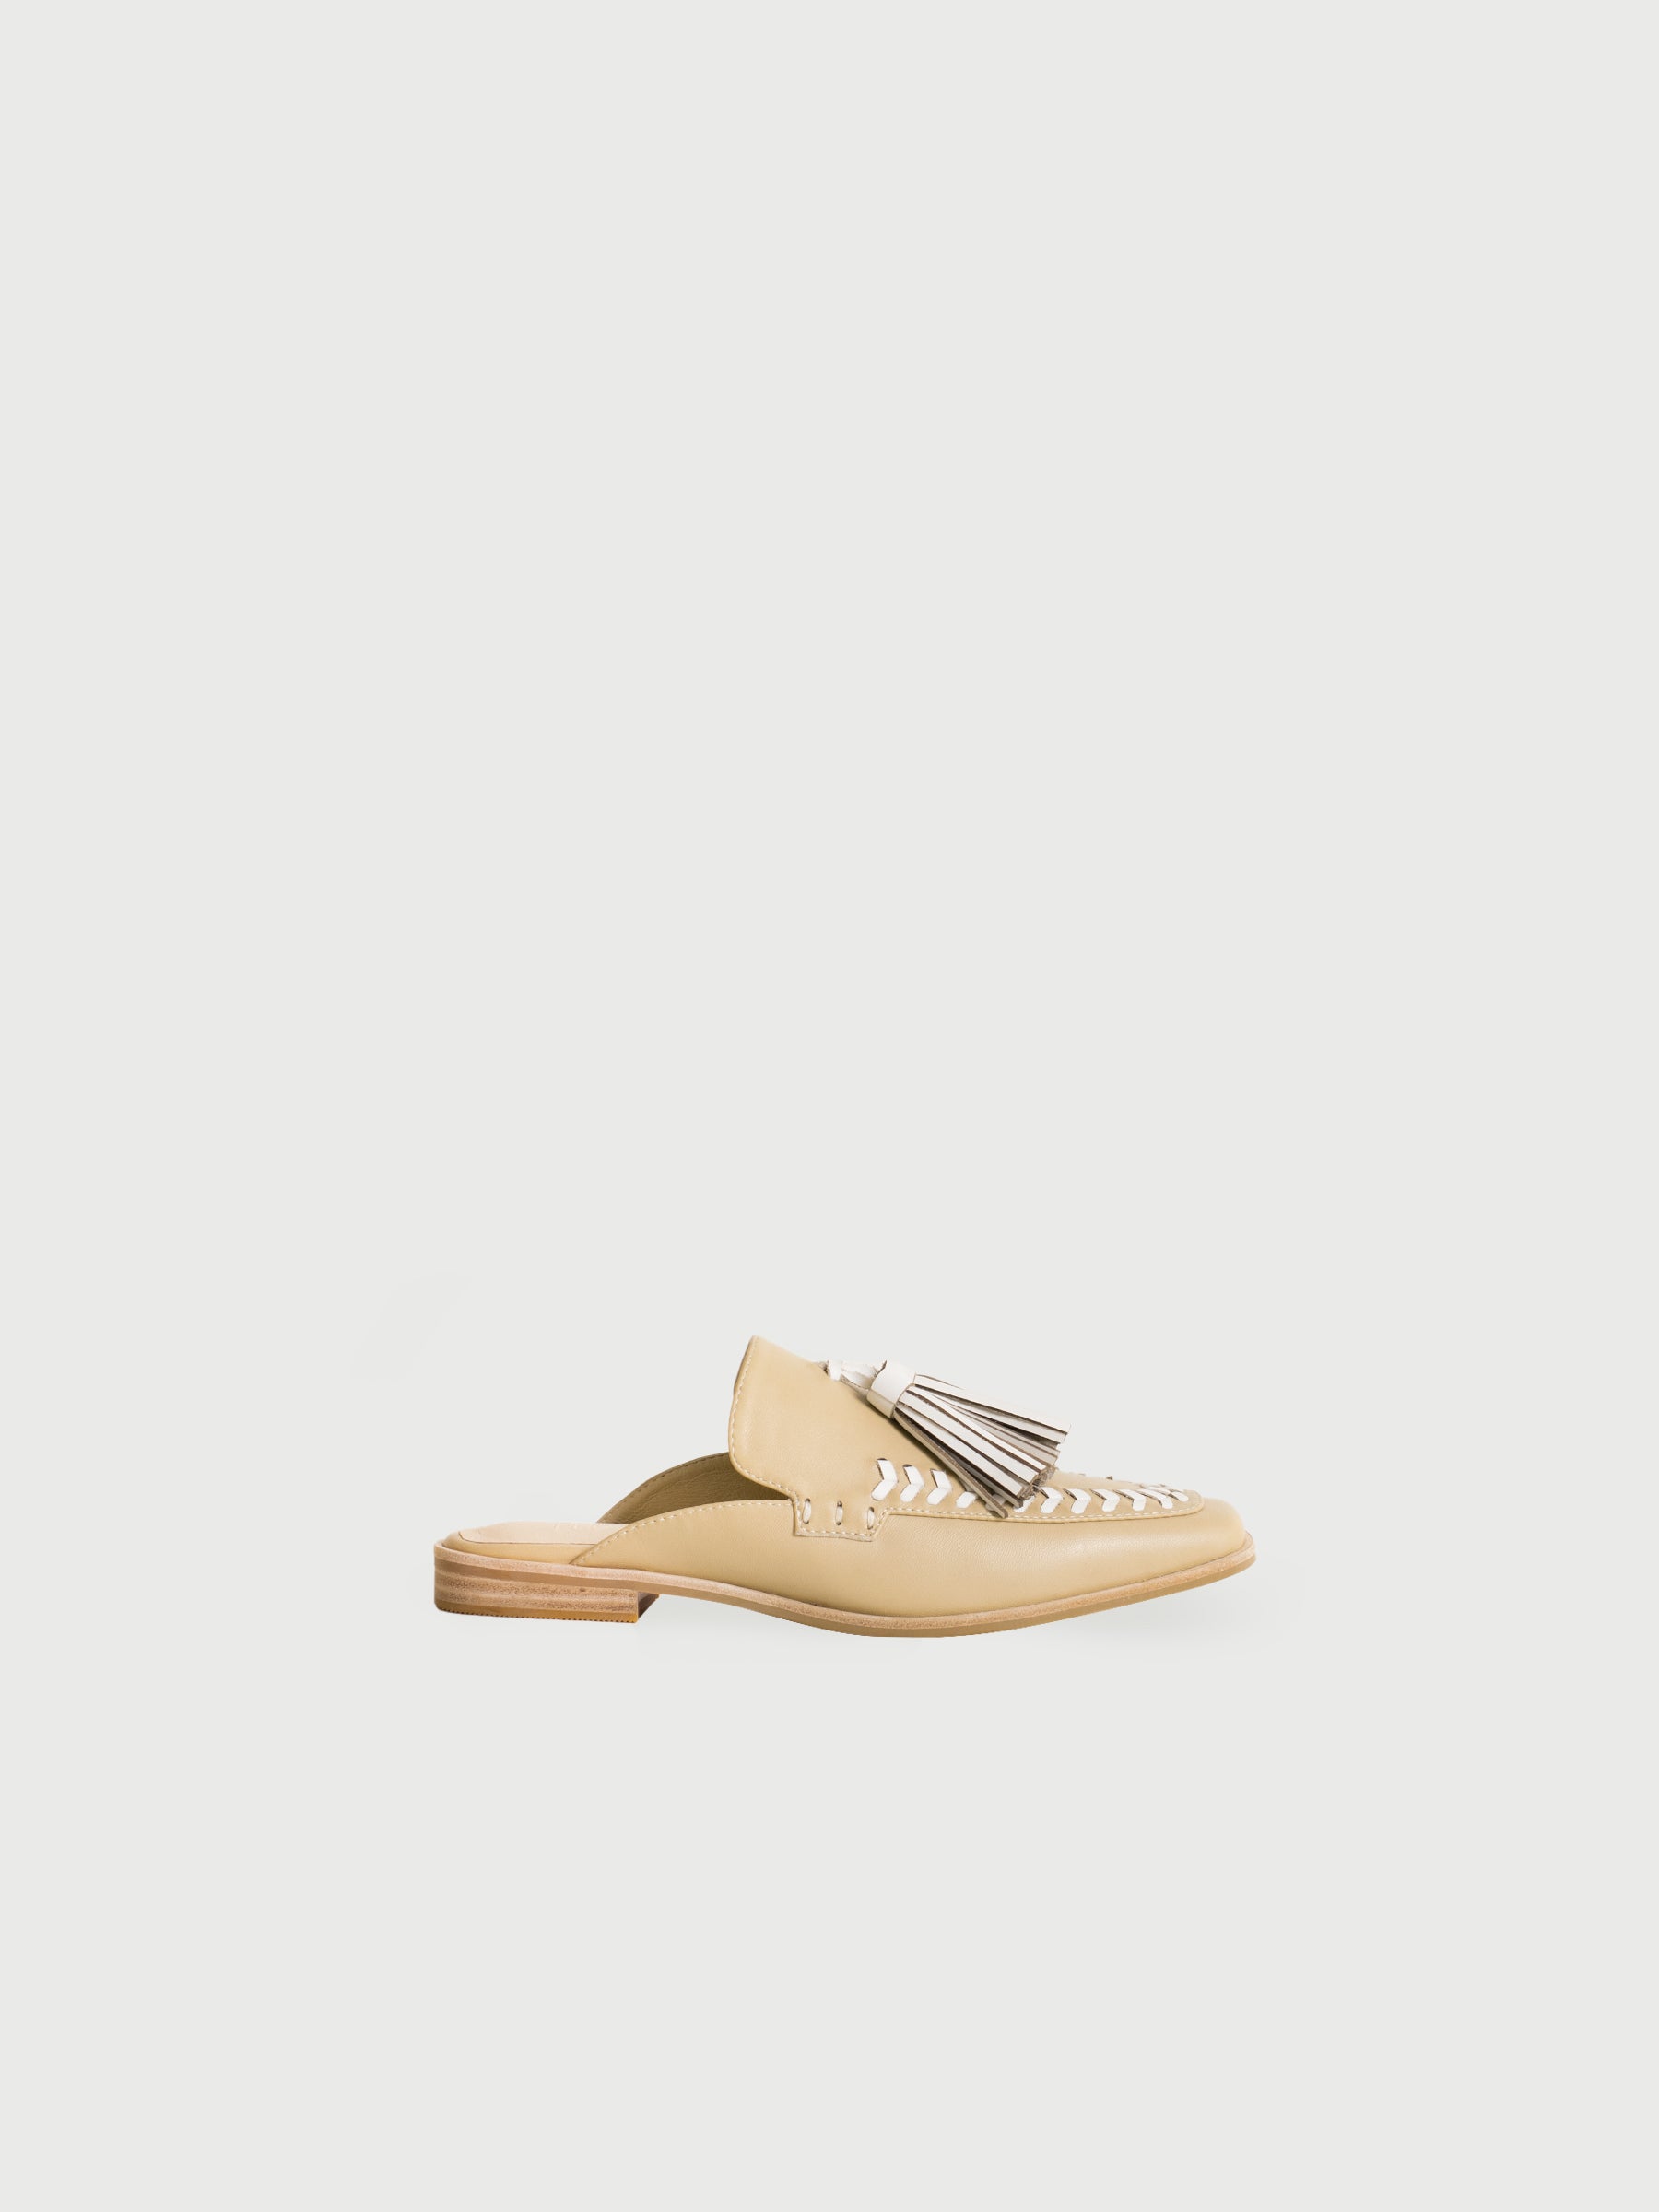 Square-Toe Woven-Leather Mules with Tassels